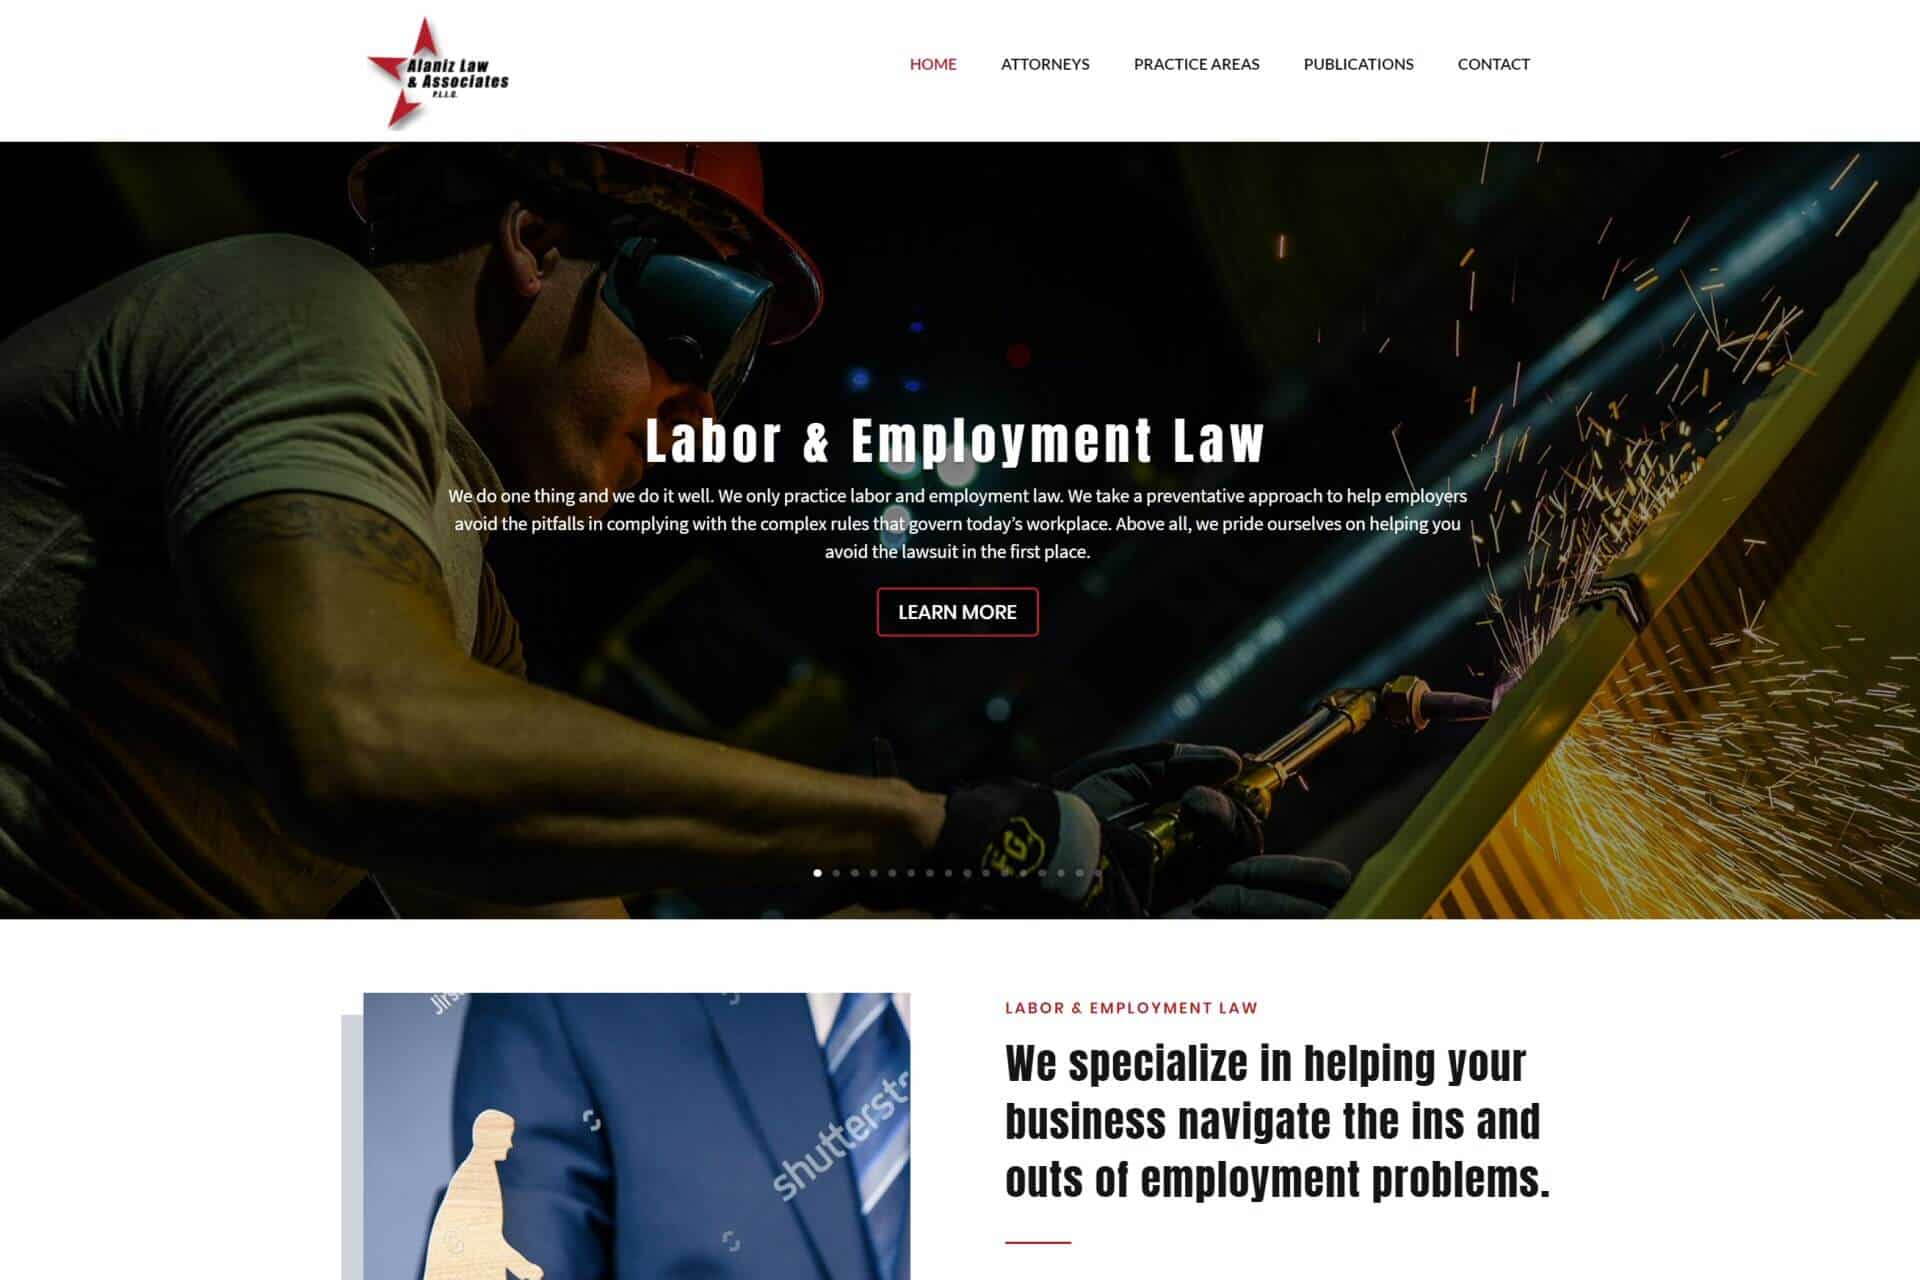 Alaniz Law and Associates by Alford Benefits